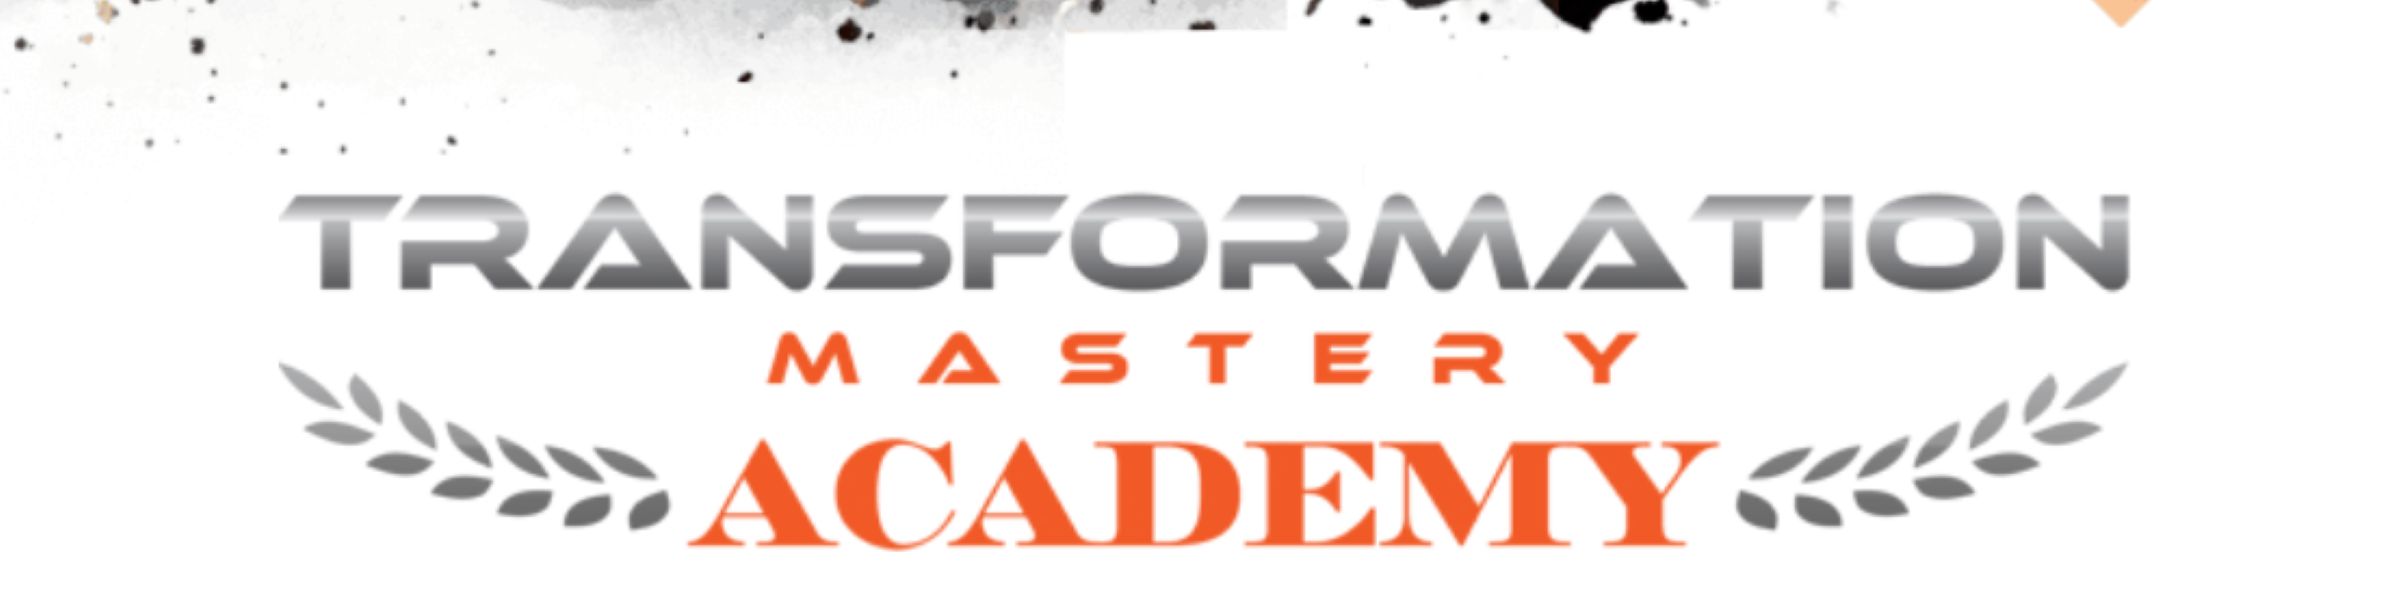 The logo of Julien Blanc's Transformation Mastery Academy